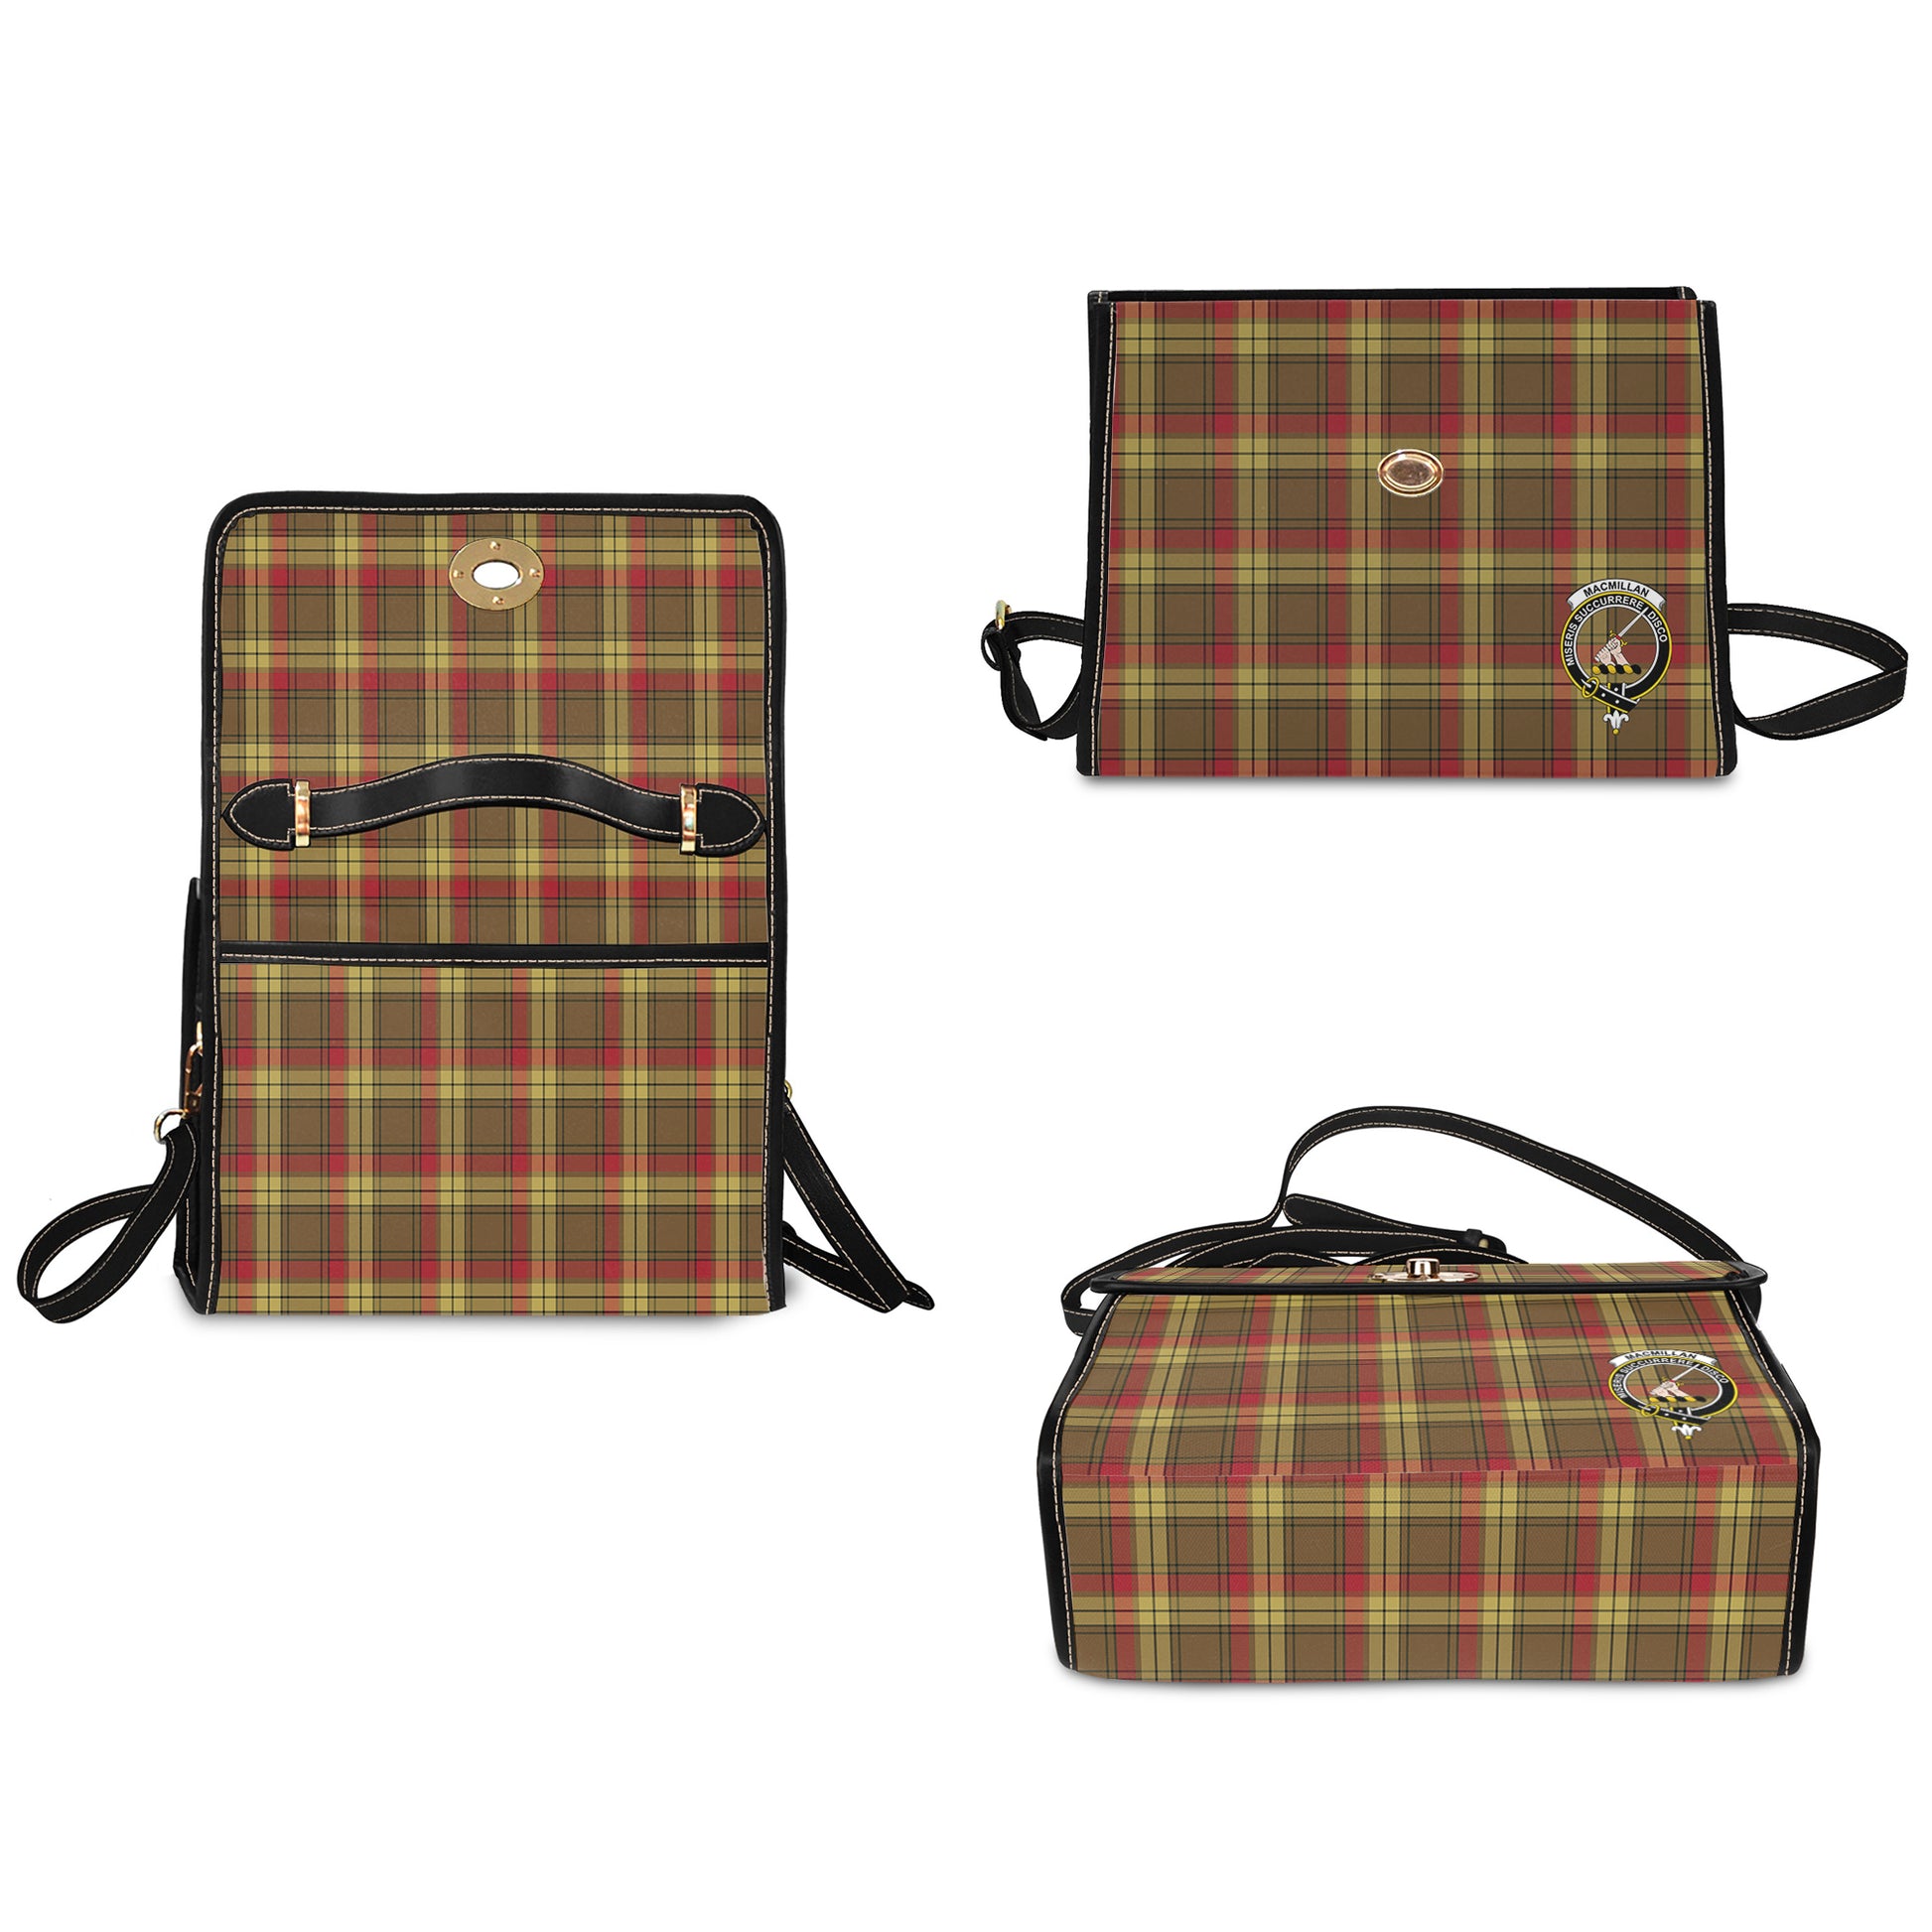 macmillan-old-weathered-tartan-leather-strap-waterproof-canvas-bag-with-family-crest